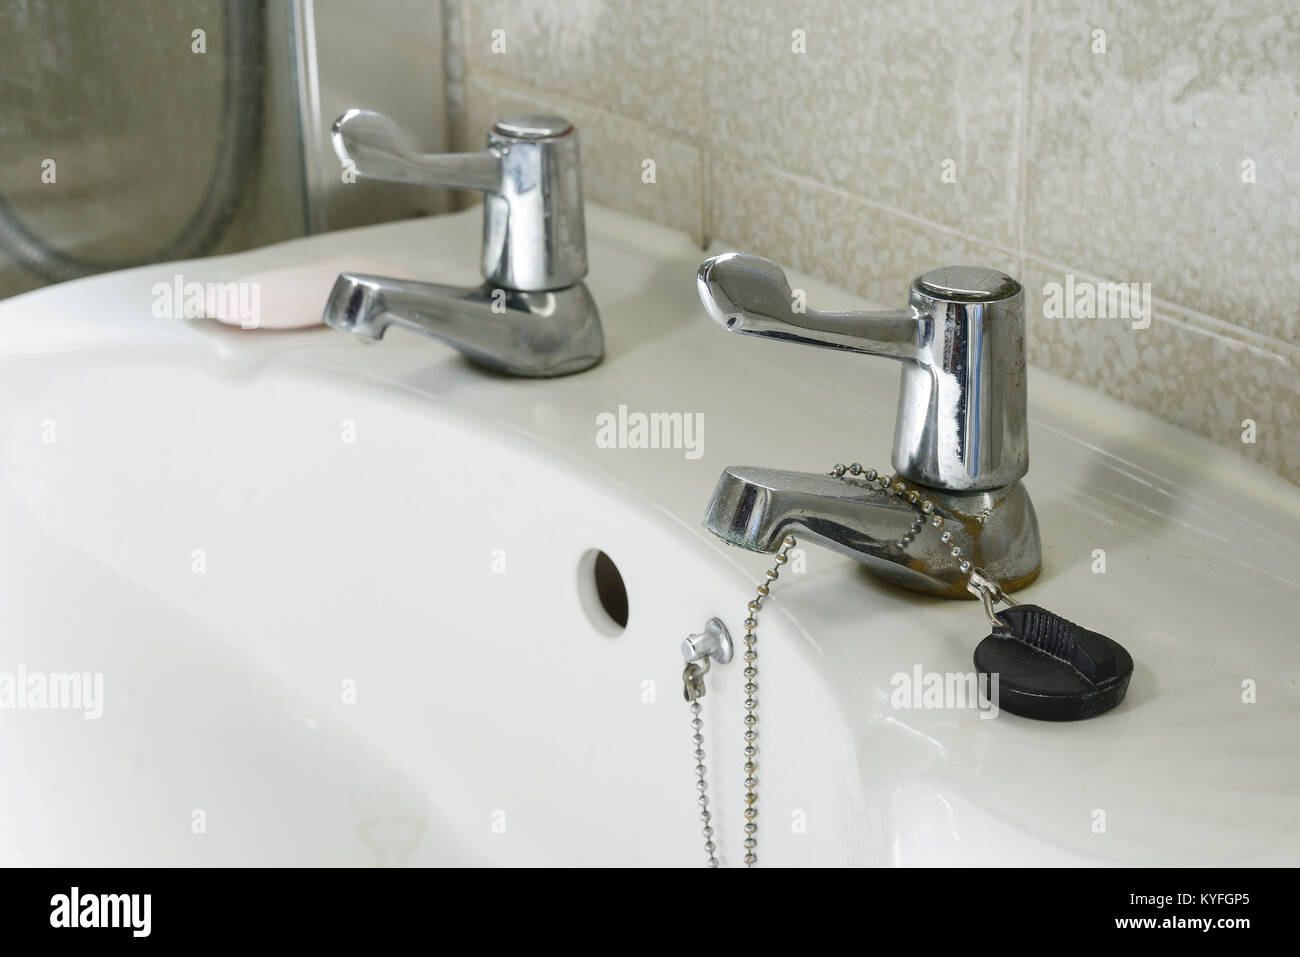 Close up detail of a domestic hand basin in white ceramic with silver taps with levers Stock Photo